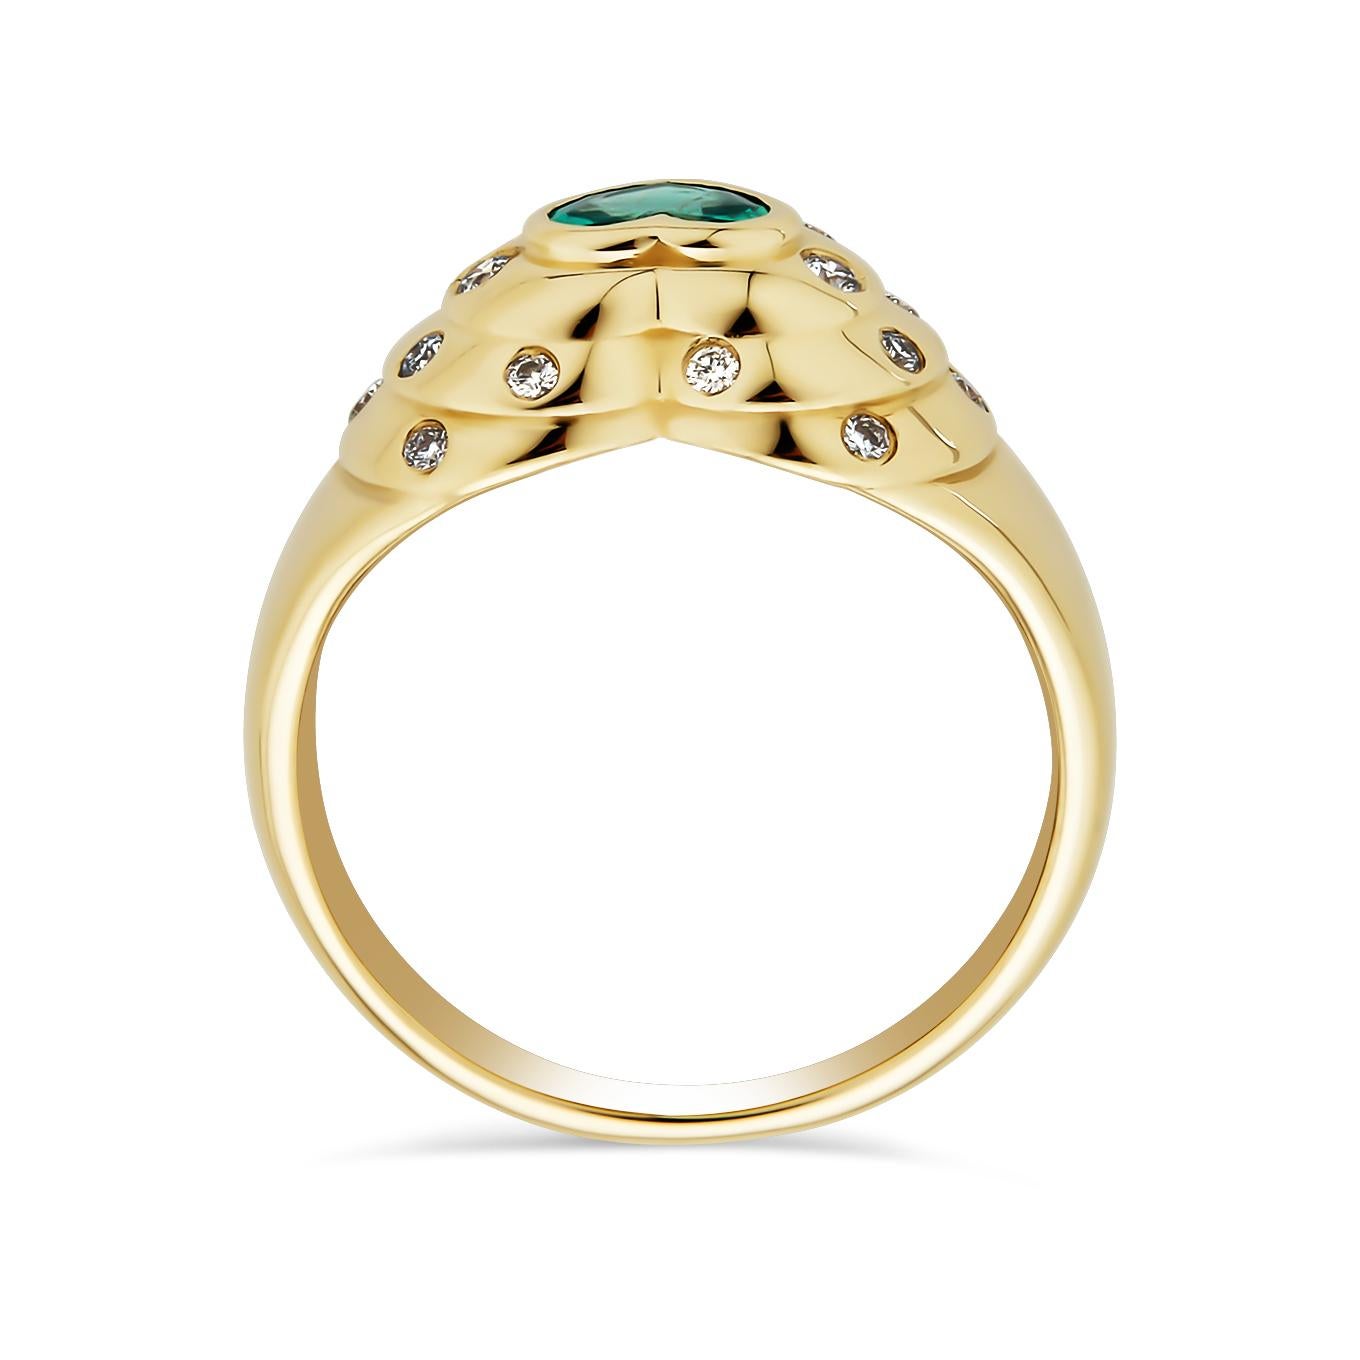 From the heart of the Thomas Laine atelier emerges a piece exuding timeless grace: the 14k Yellow Gold Heart Ring. Nestled at its core is the mesmerizing allure of a hand-selected Emerald, evoking the deepest sentiments of love and devotion. This